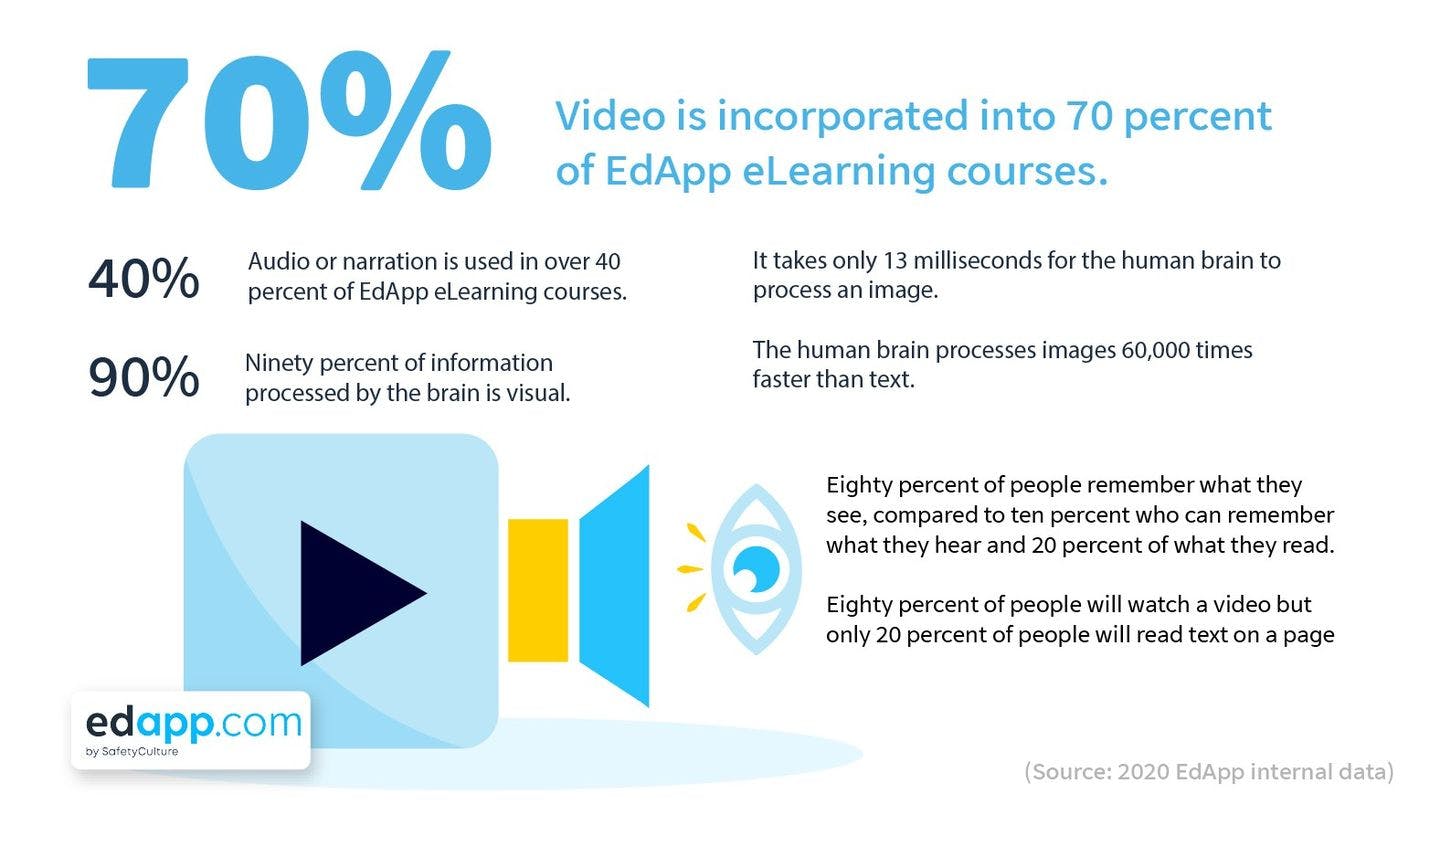 eLearning statistics 2020 - EdApp - Video, image, audio, narration in learning